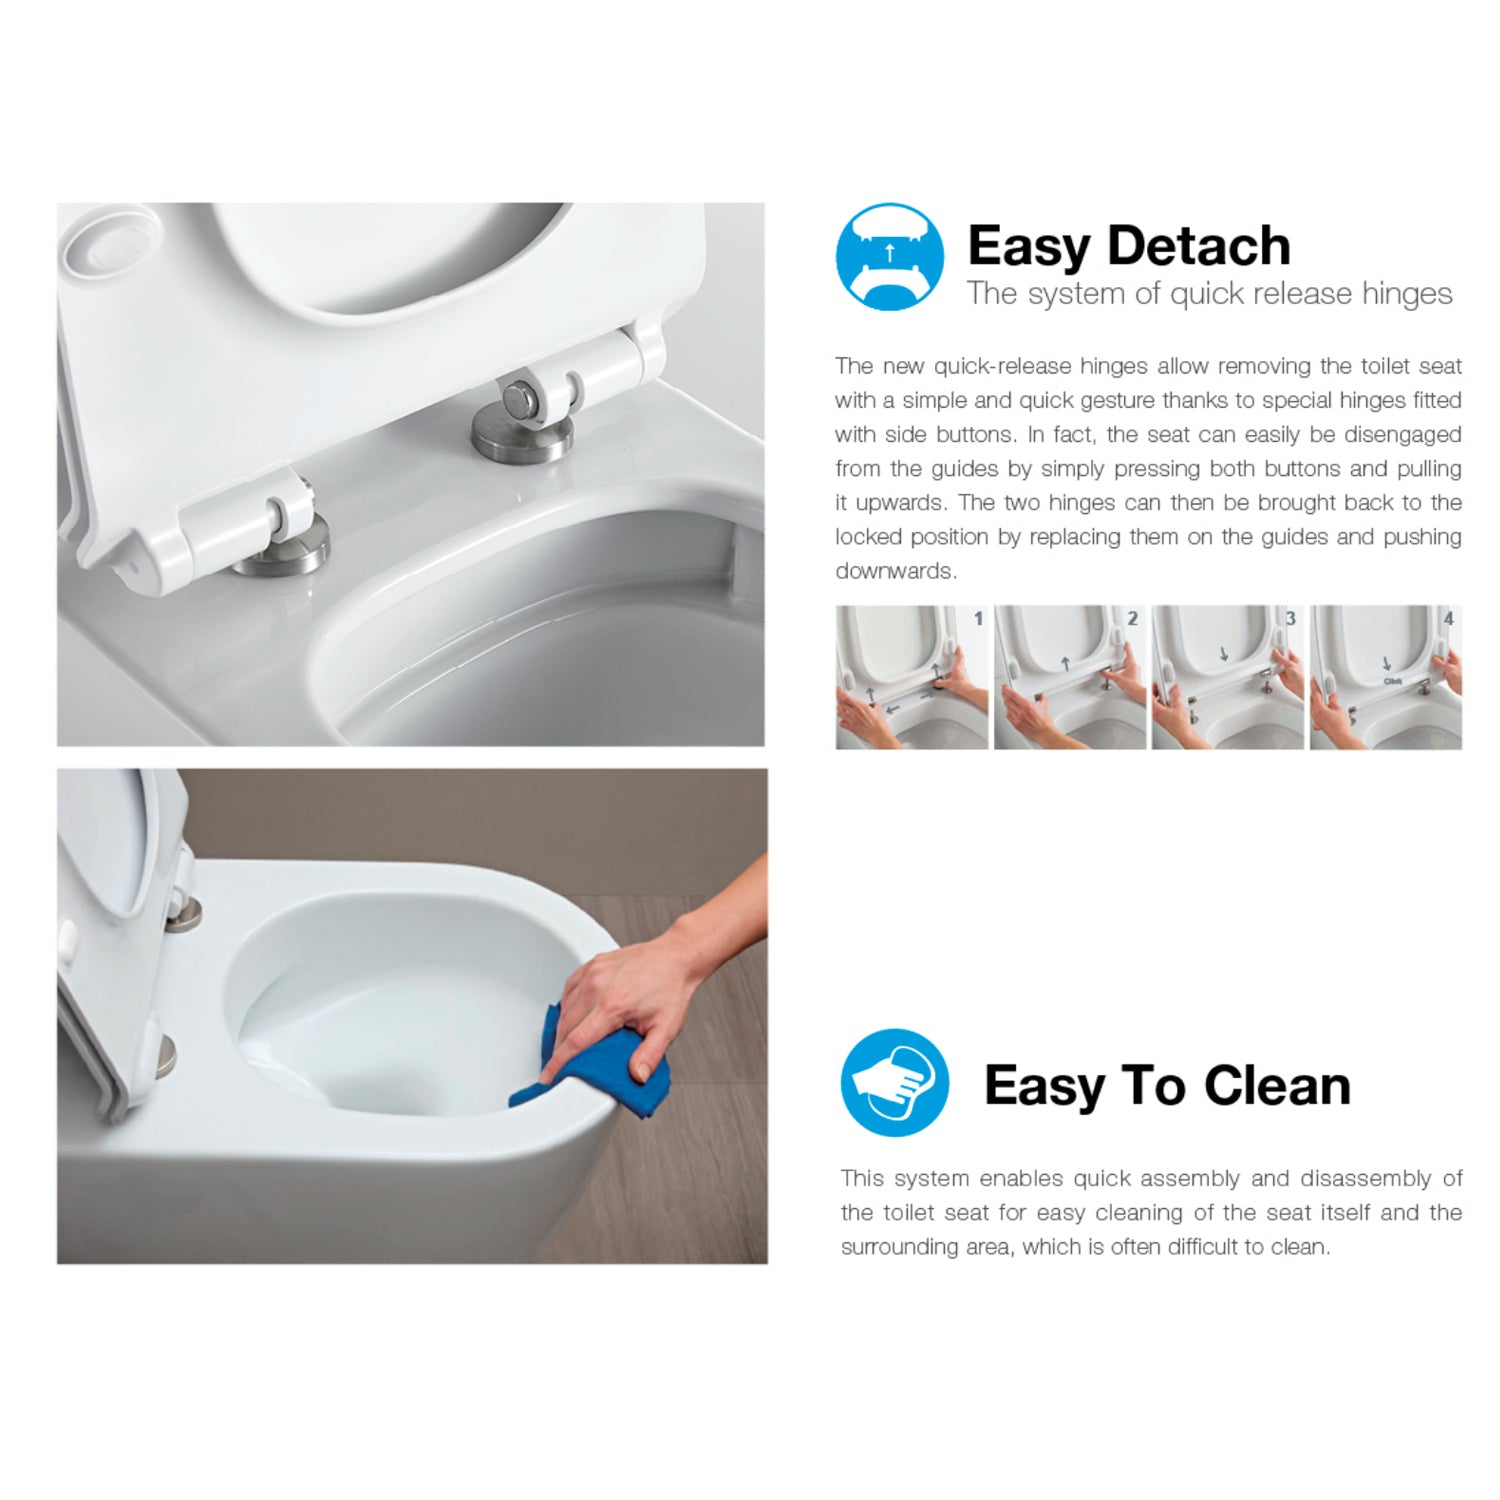 1-piece 0.88/1.28 GPF Dual Flush Elongated Toilet in White Seat Included